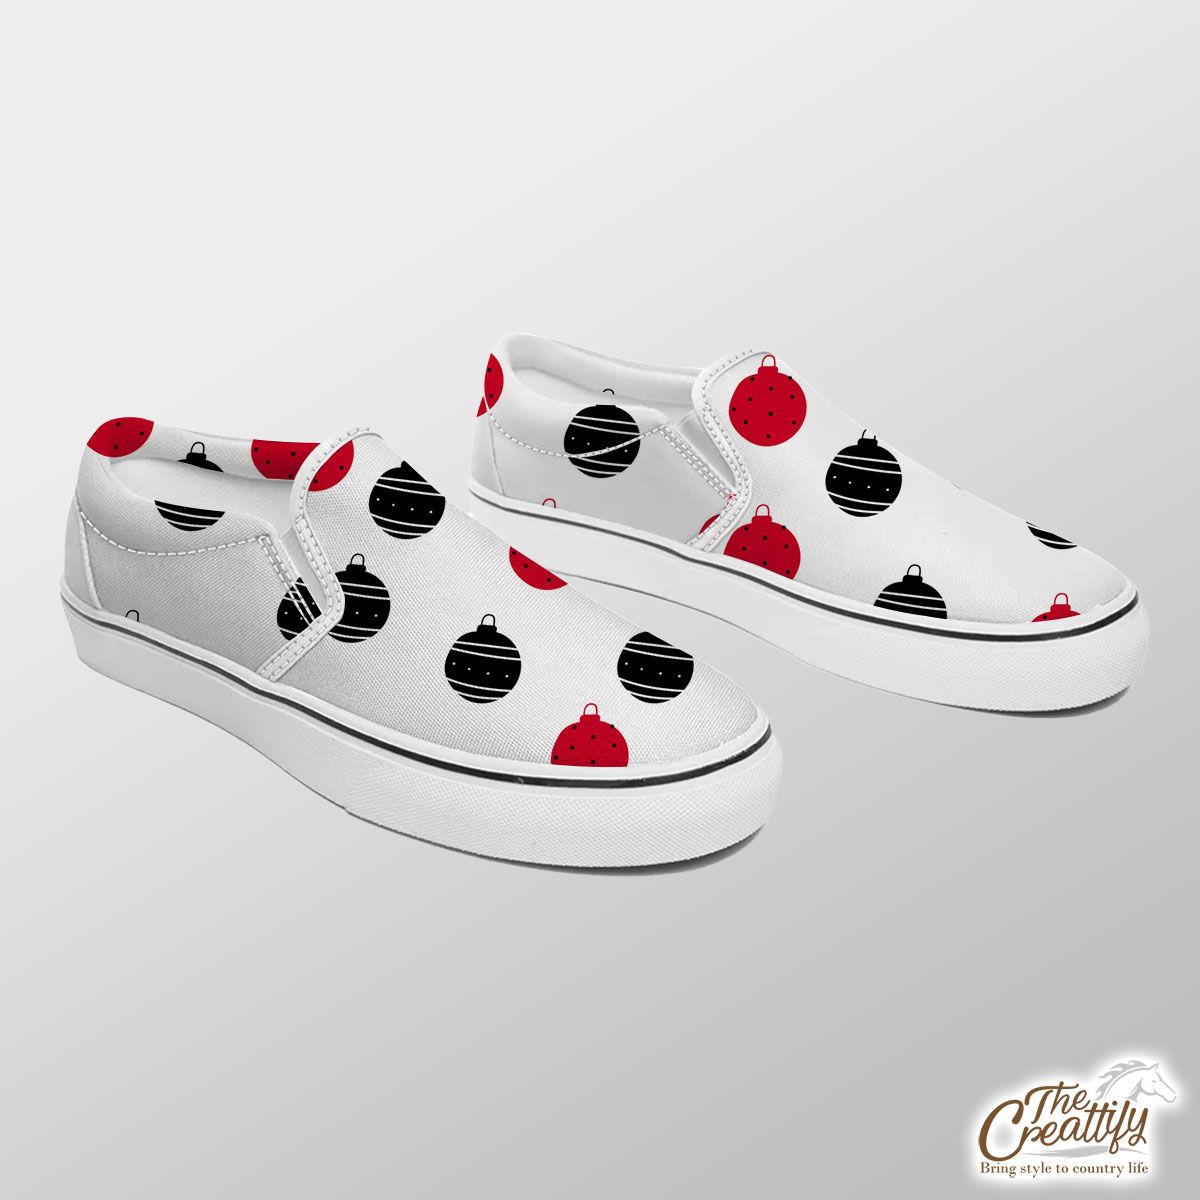 Hand Drawn Black and Red Christmas Balls Seamless Pattern Slip On Sneakers